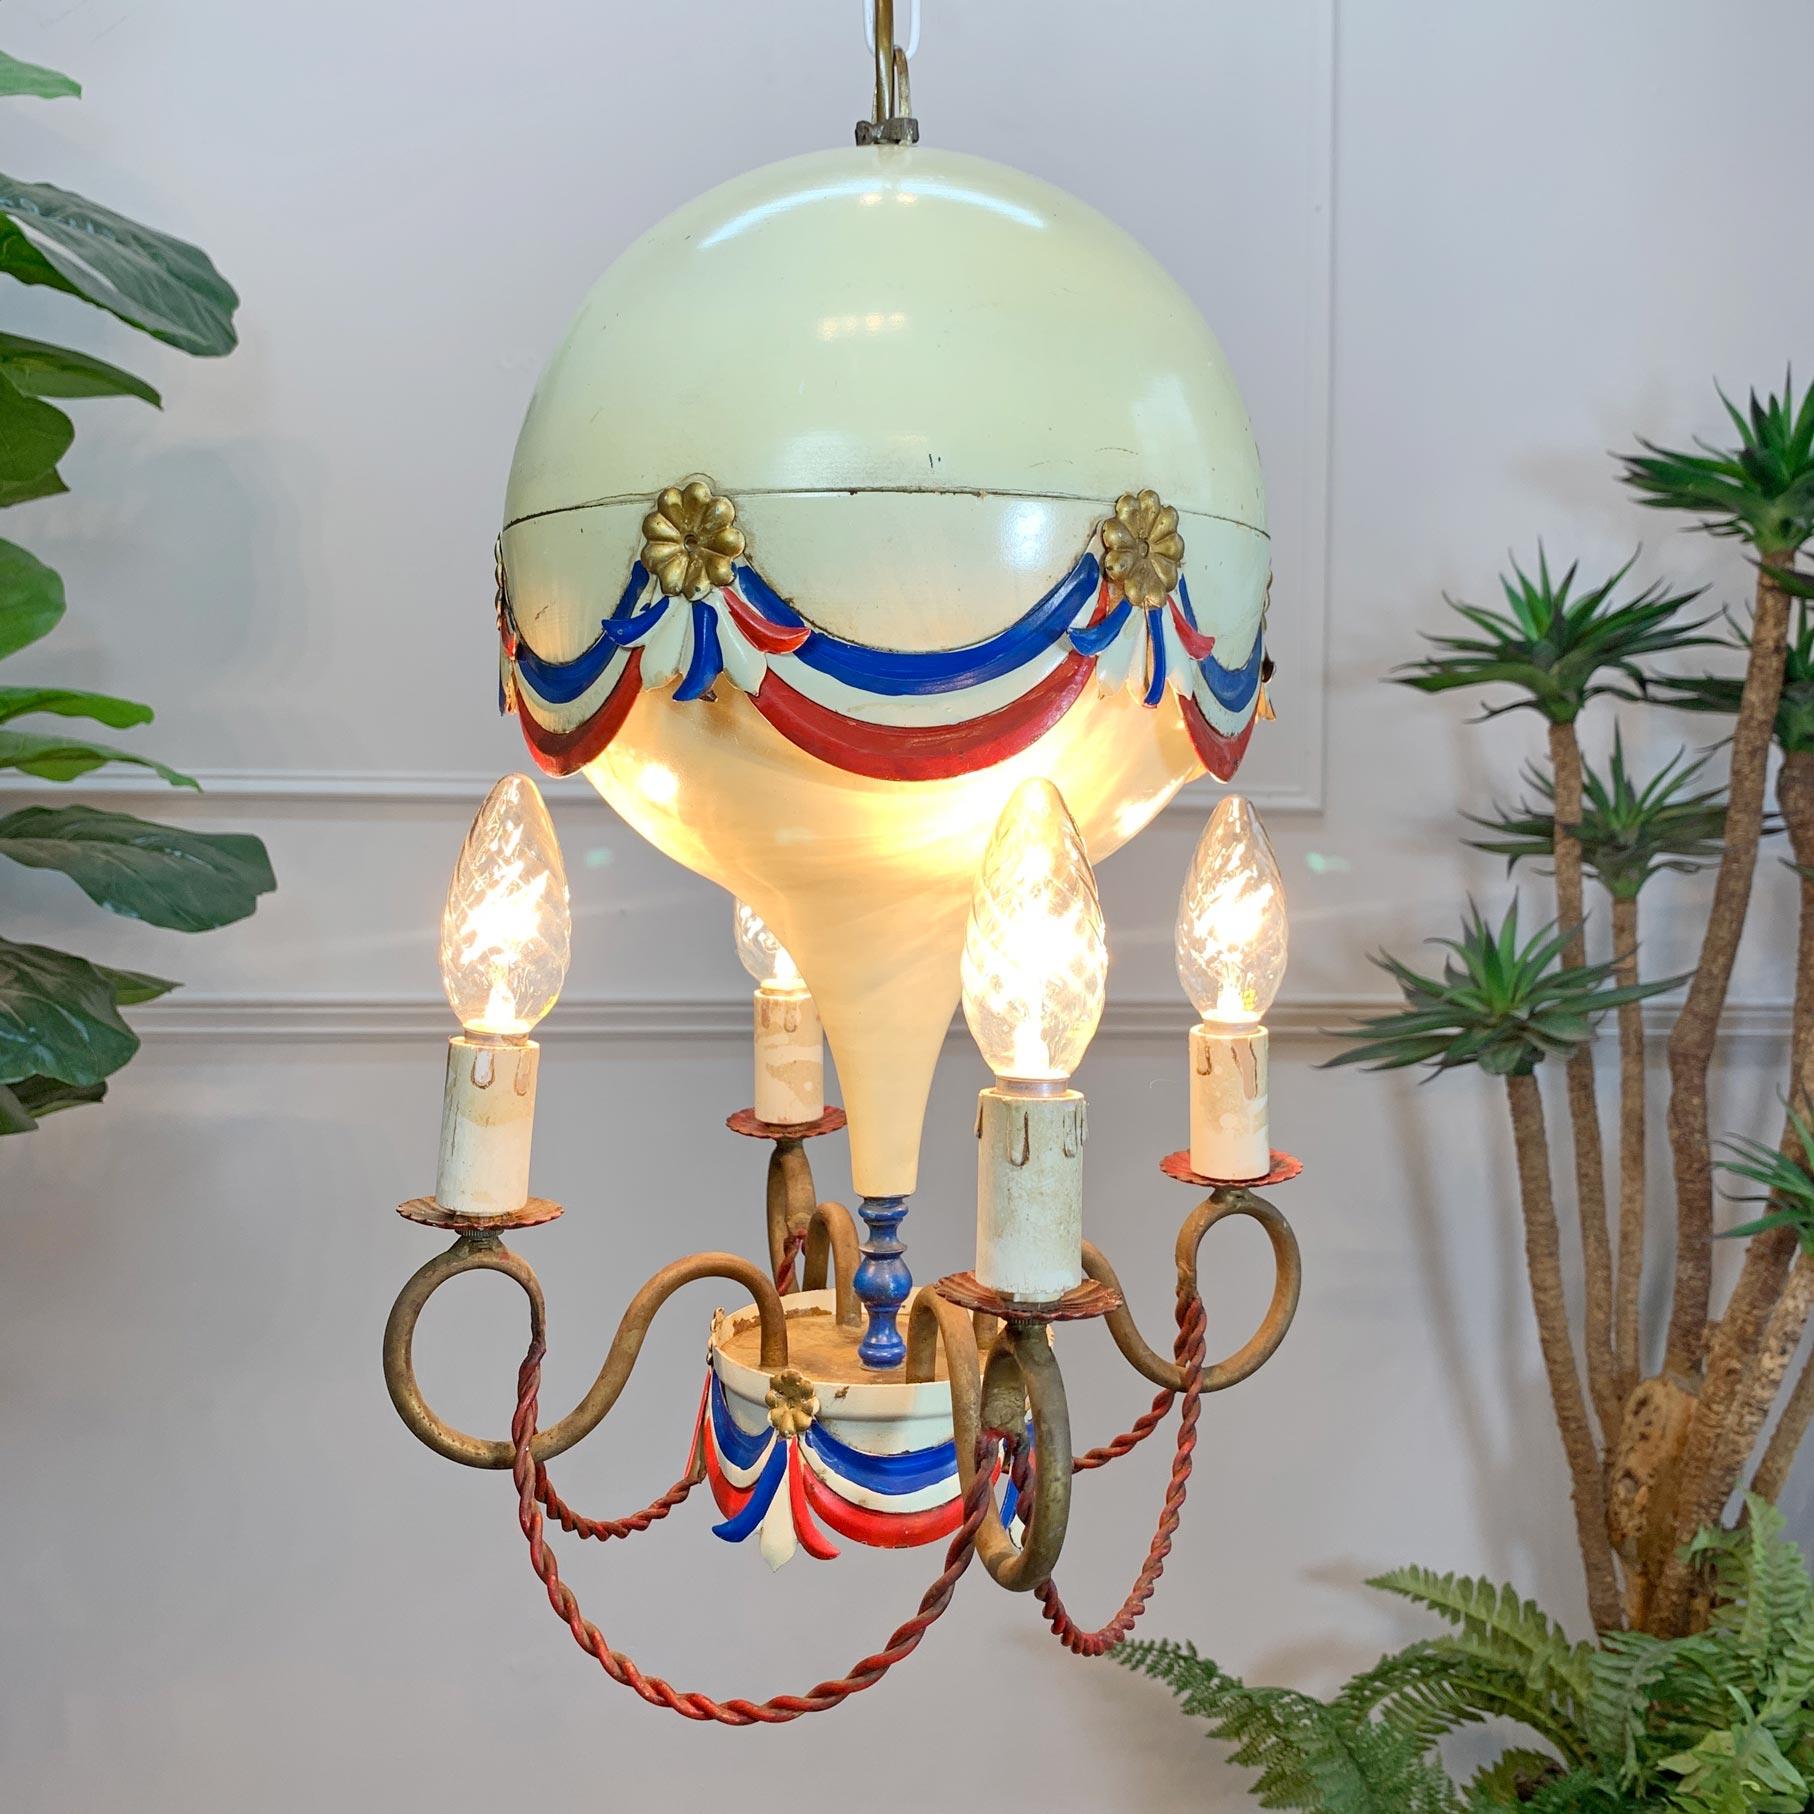 Mid century toleware hot air balloon chandelier, c 1950’s

This stunning light is a rare find in such great original condition
The main balloon body of the light is in full metal with original hand painted swags and rosettes in red,white, blue &